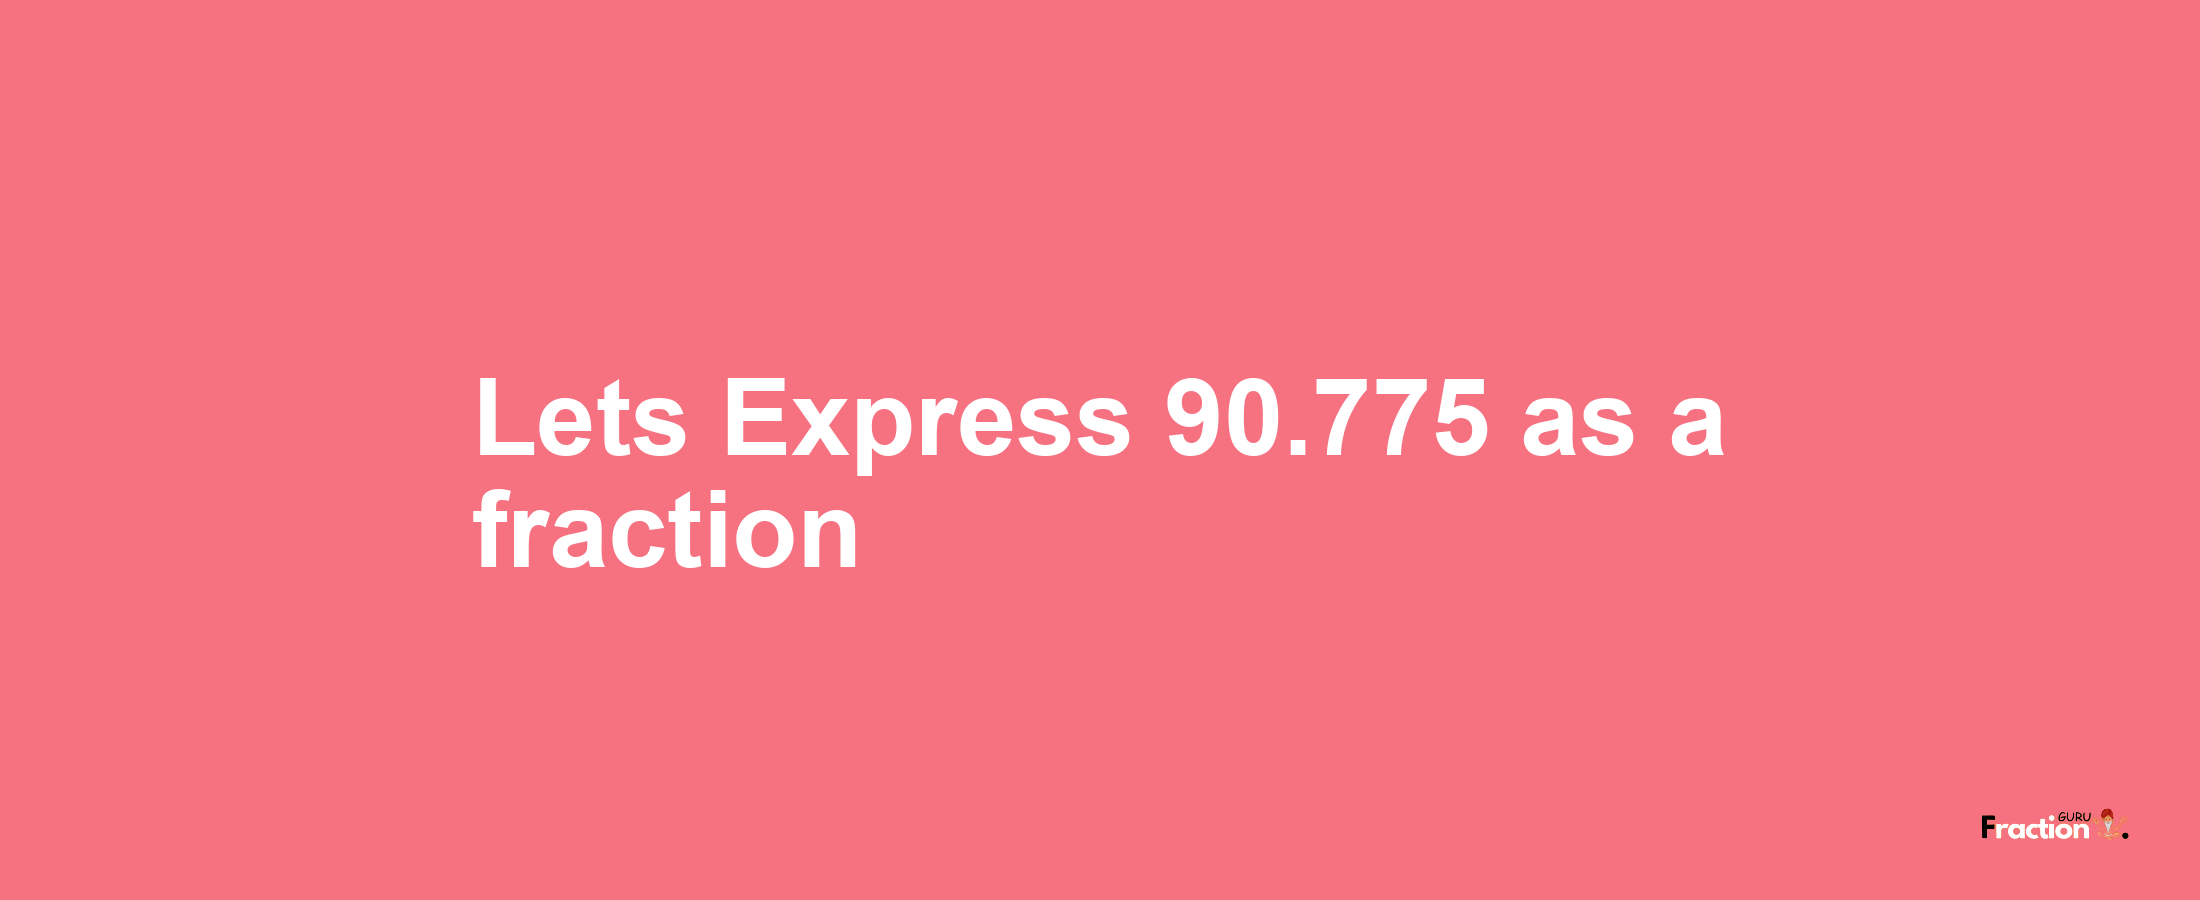 Lets Express 90.775 as afraction